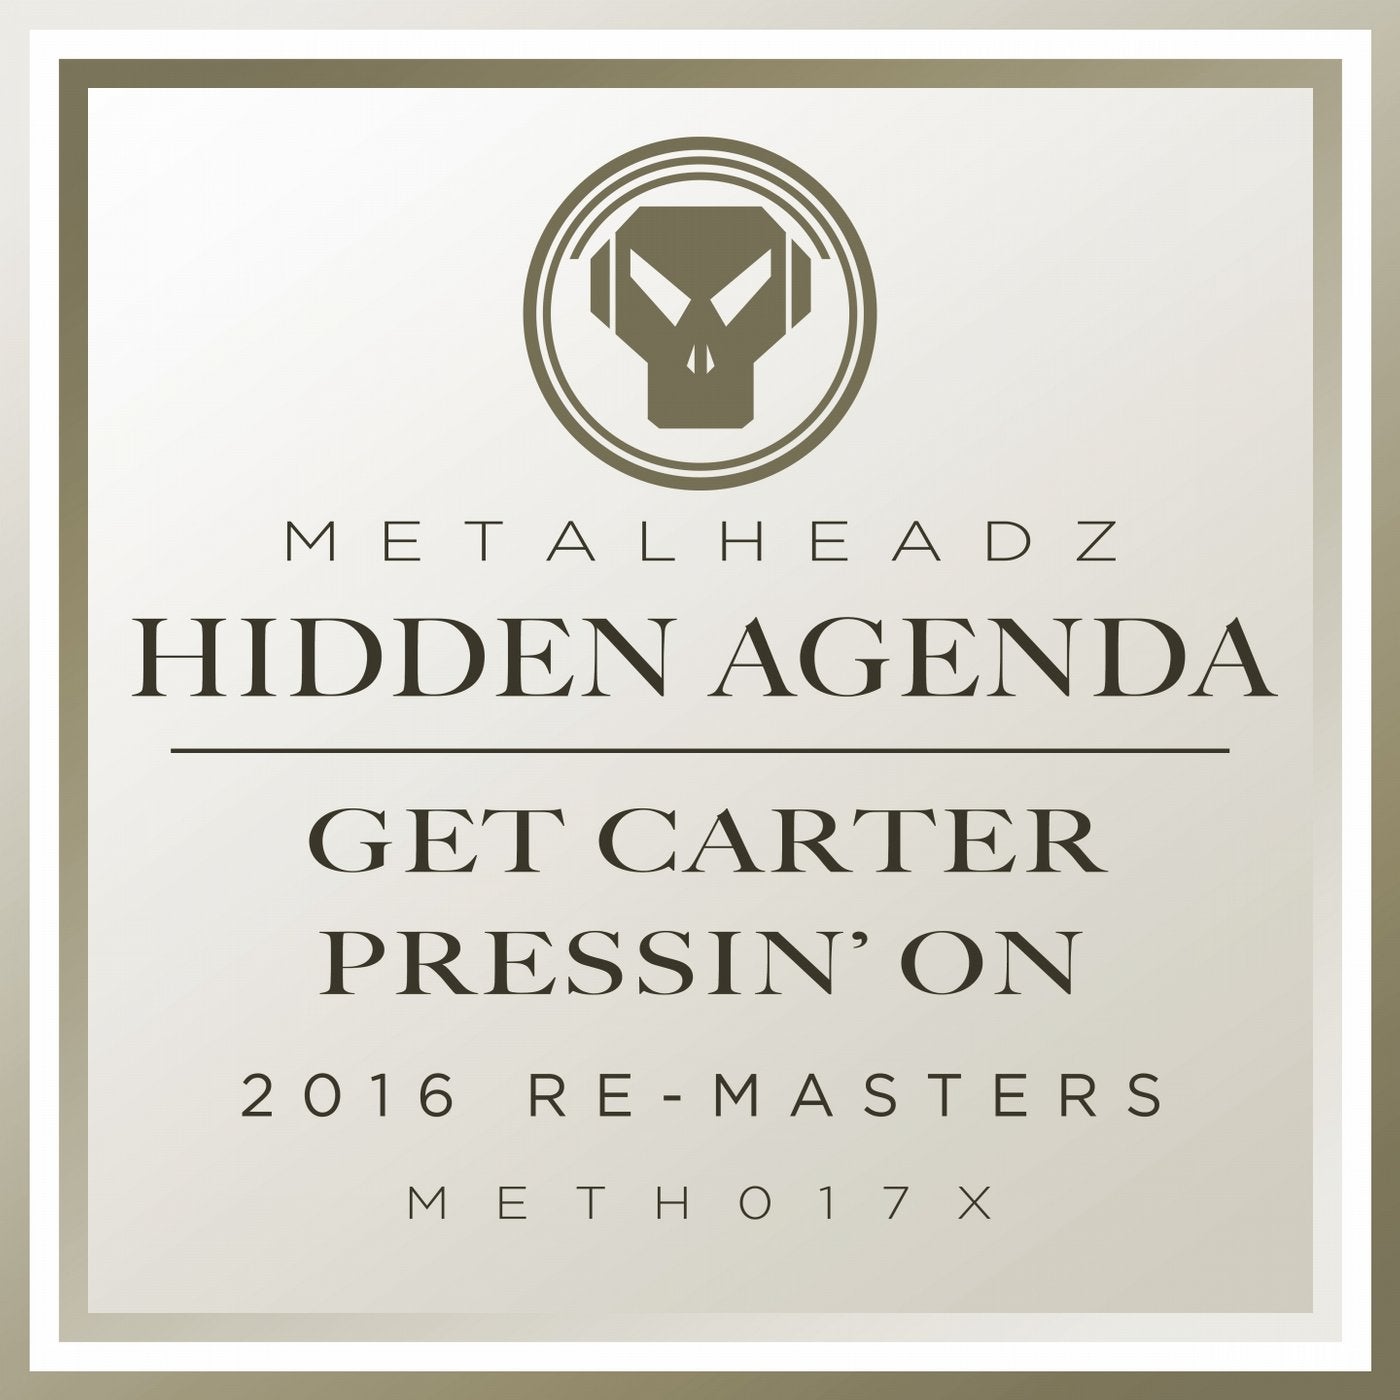 Get Carter / Pressin' On (2016 Remasters)